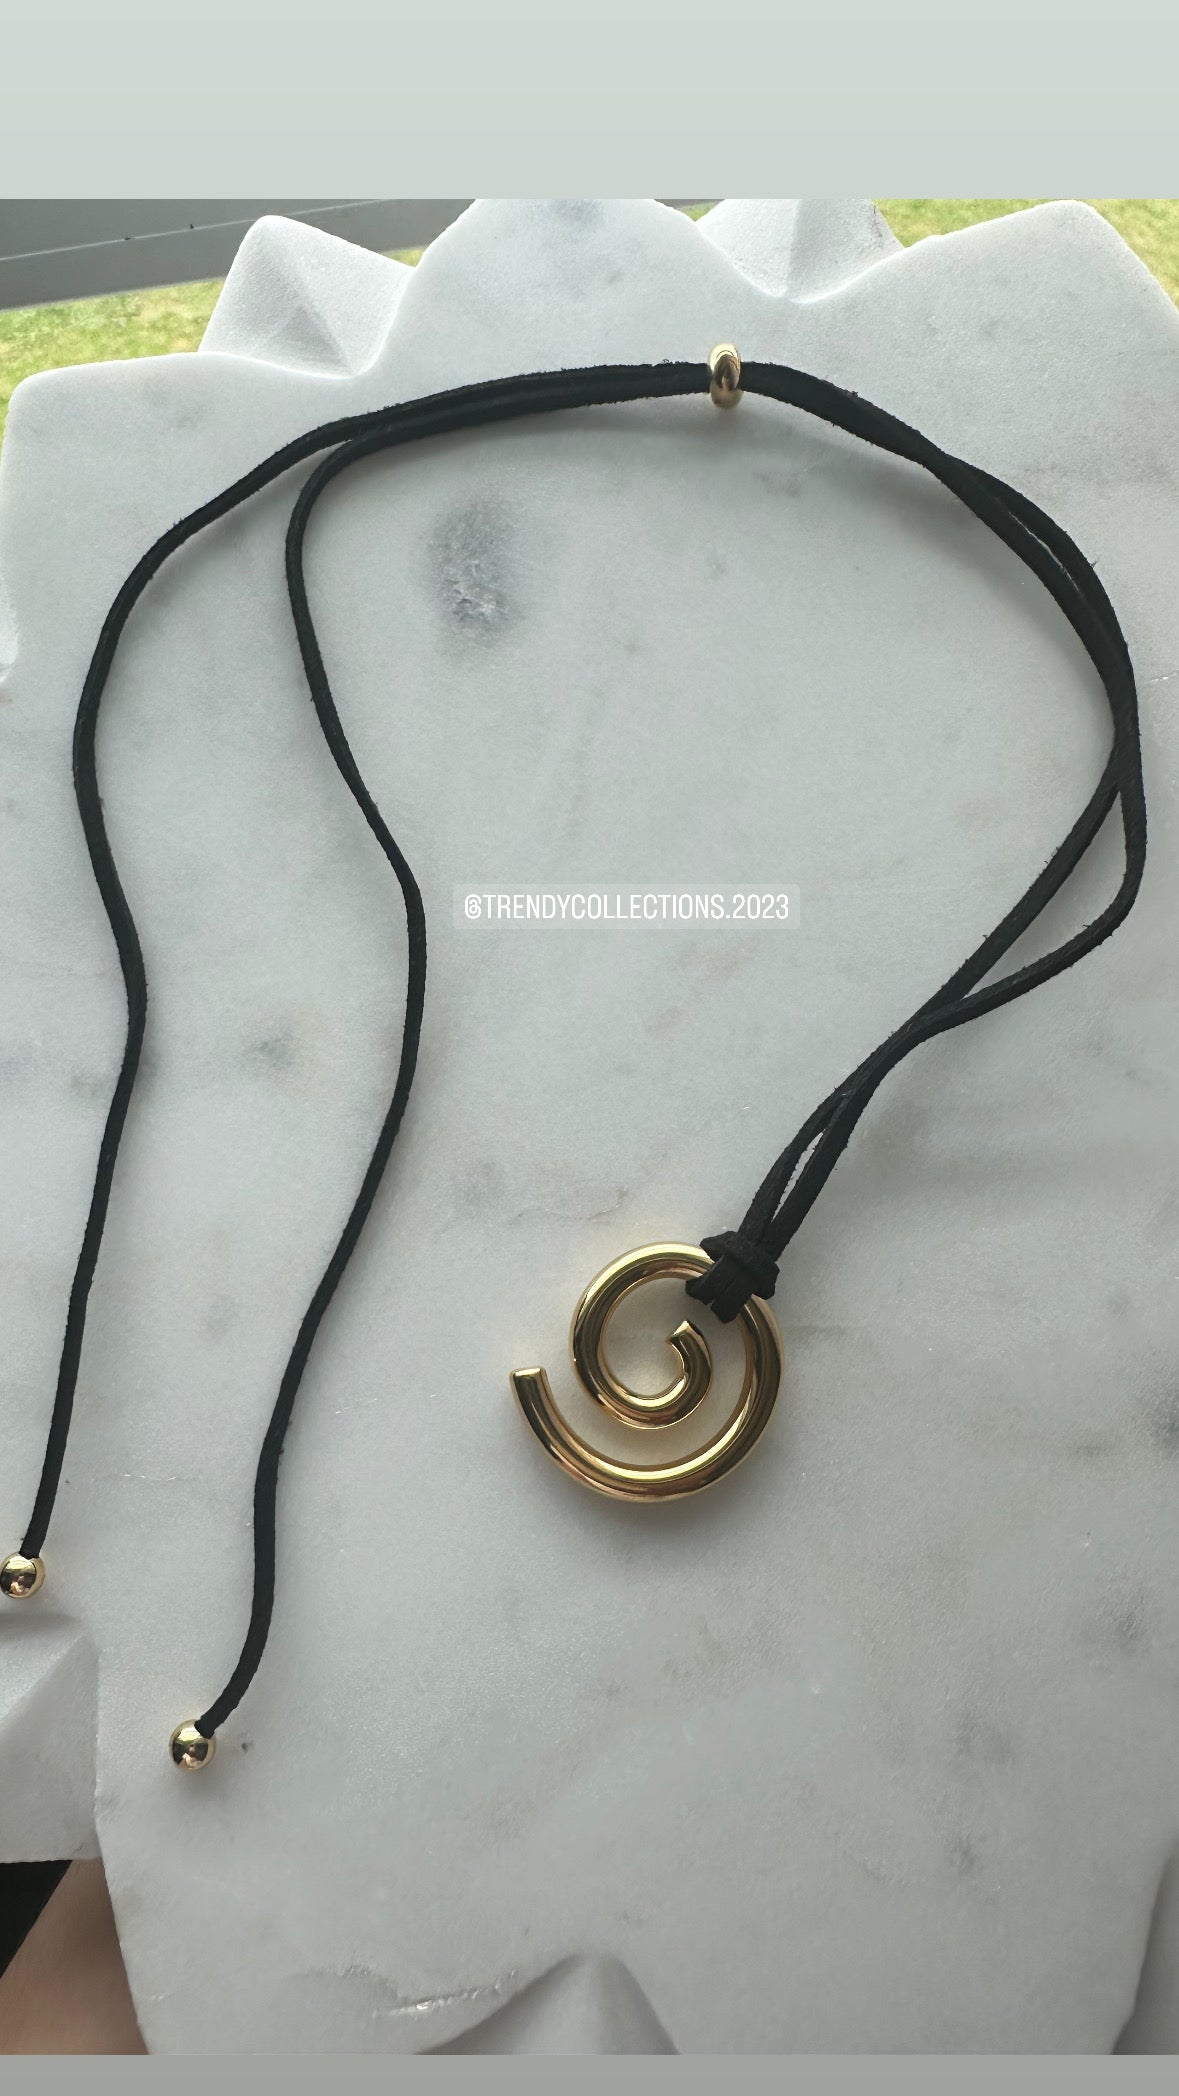 Caracol Necklace